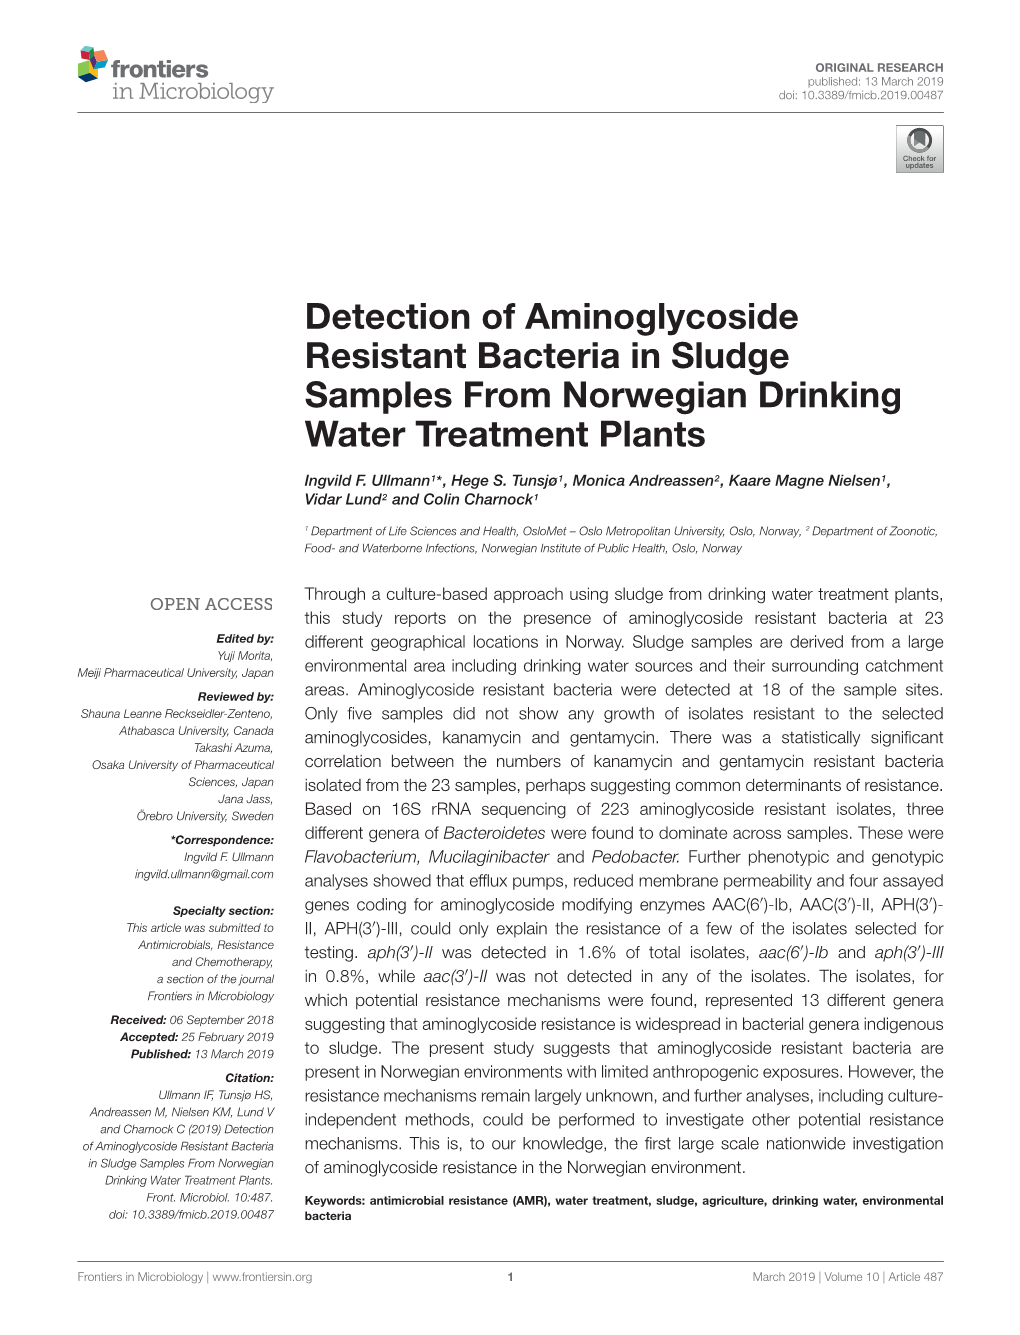 Detection of Aminoglycoside Resistant Bacteria in Sludge Samples from Norwegian Drinking Water Treatment Plants